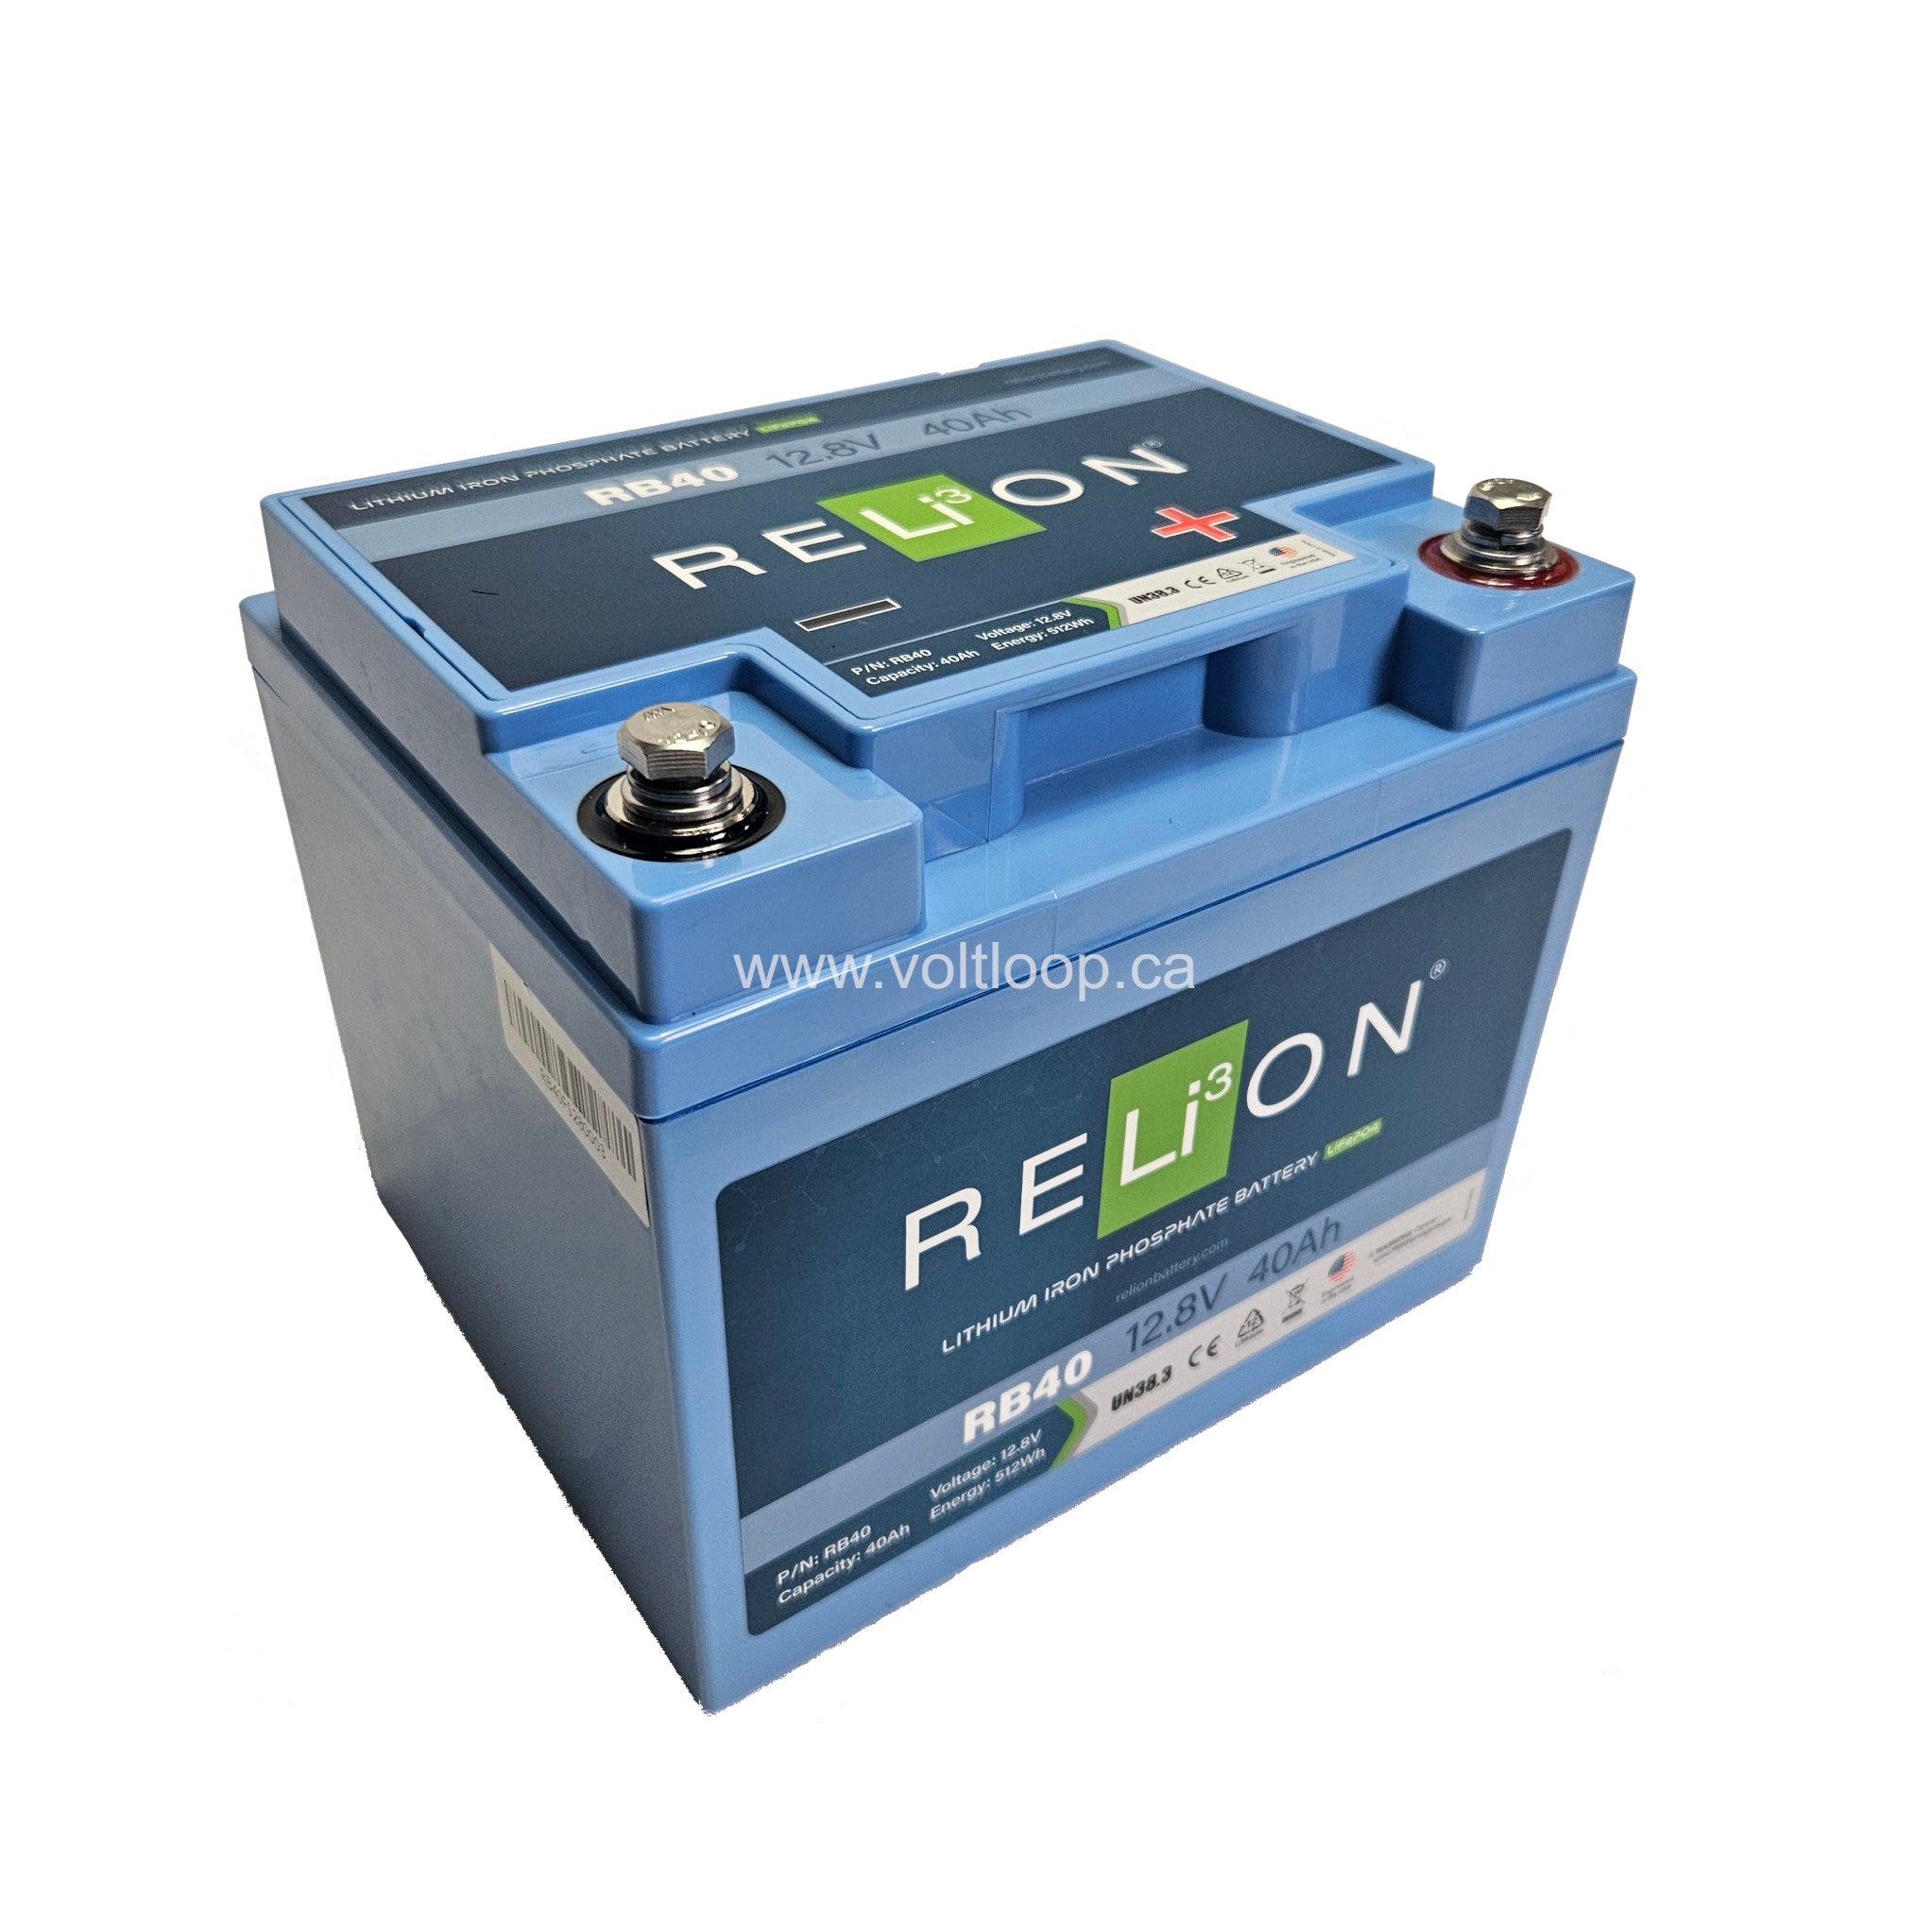 Relion RB40 Lithium Battery